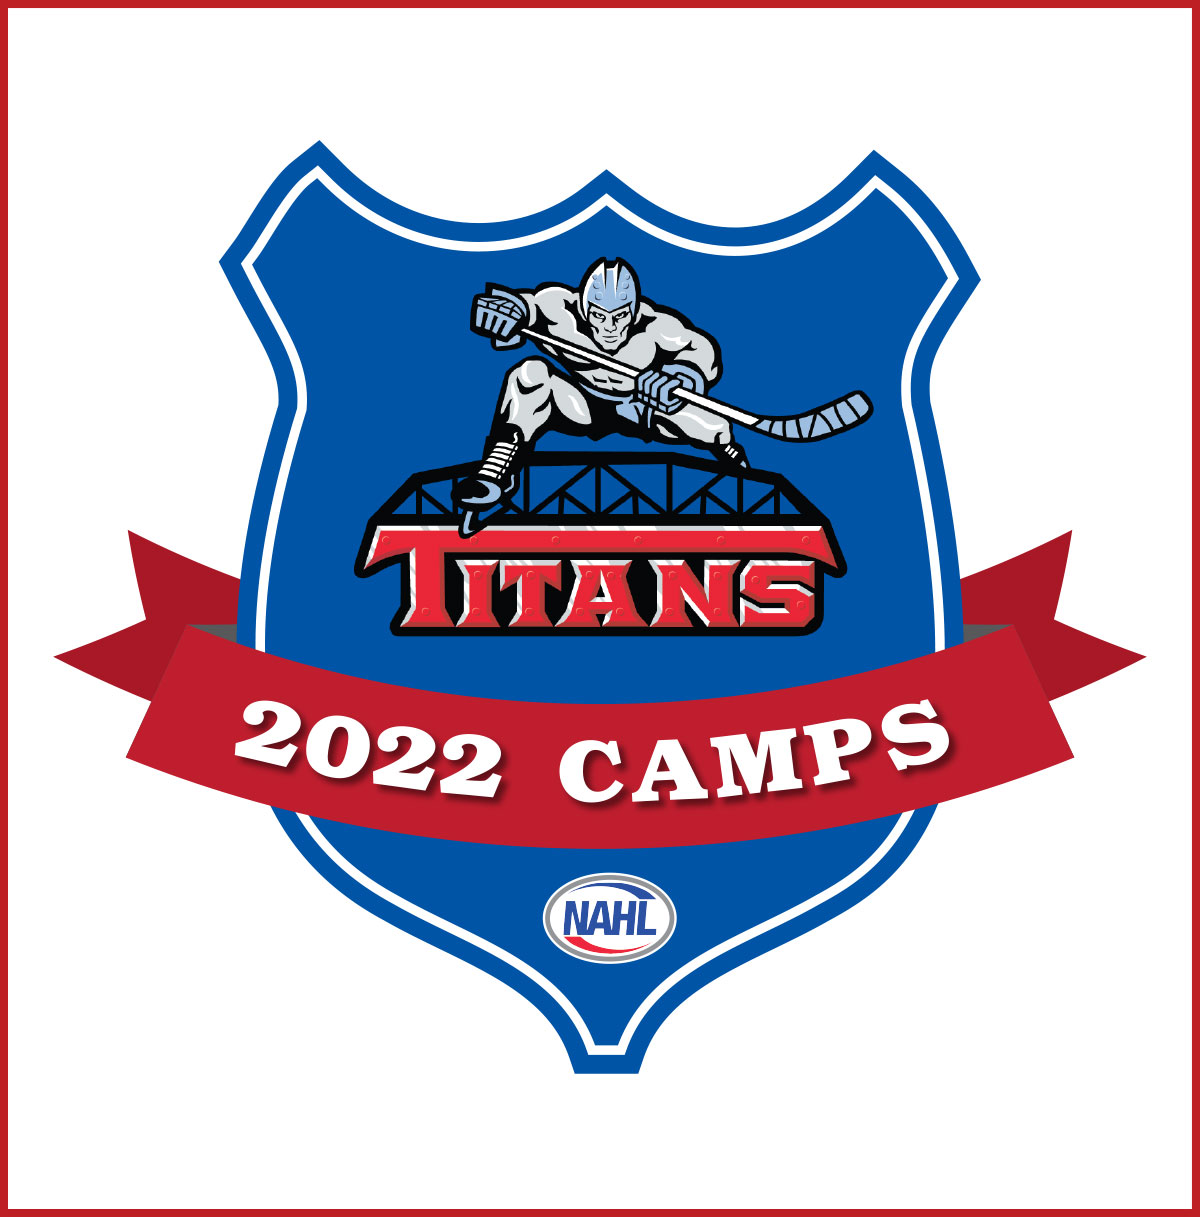 New Jersey Titans 2022 Camps